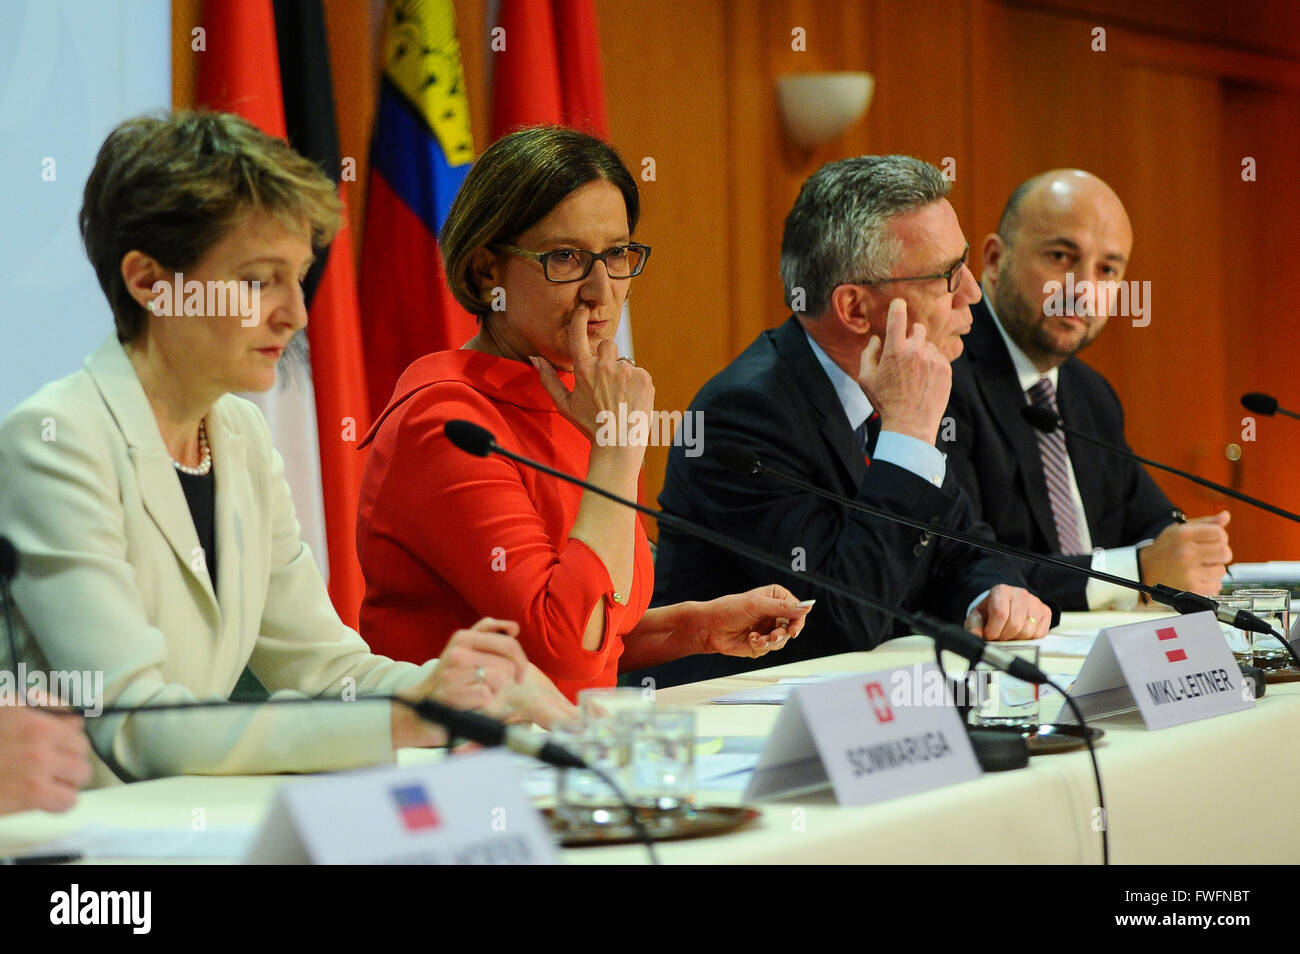 Vienna, Austria. 5th Apr, 2016. (L-R) Swiss Justice Minister Simonetta Sommaruga, Austrian Interior Minister Johanna Mikl-Leitner, German Interior Minister Thomas de Maiziere and Luxembourg Minister of Interior Security Etienne Schneider attend a press conference after a meeting in Vienna, Austria, April 5, 2016. The officials held a meeting in Vienna on Tuesday to discuss issues related to refugees. © Qian Yi/Xinhua/Alamy Live News Stock Photo